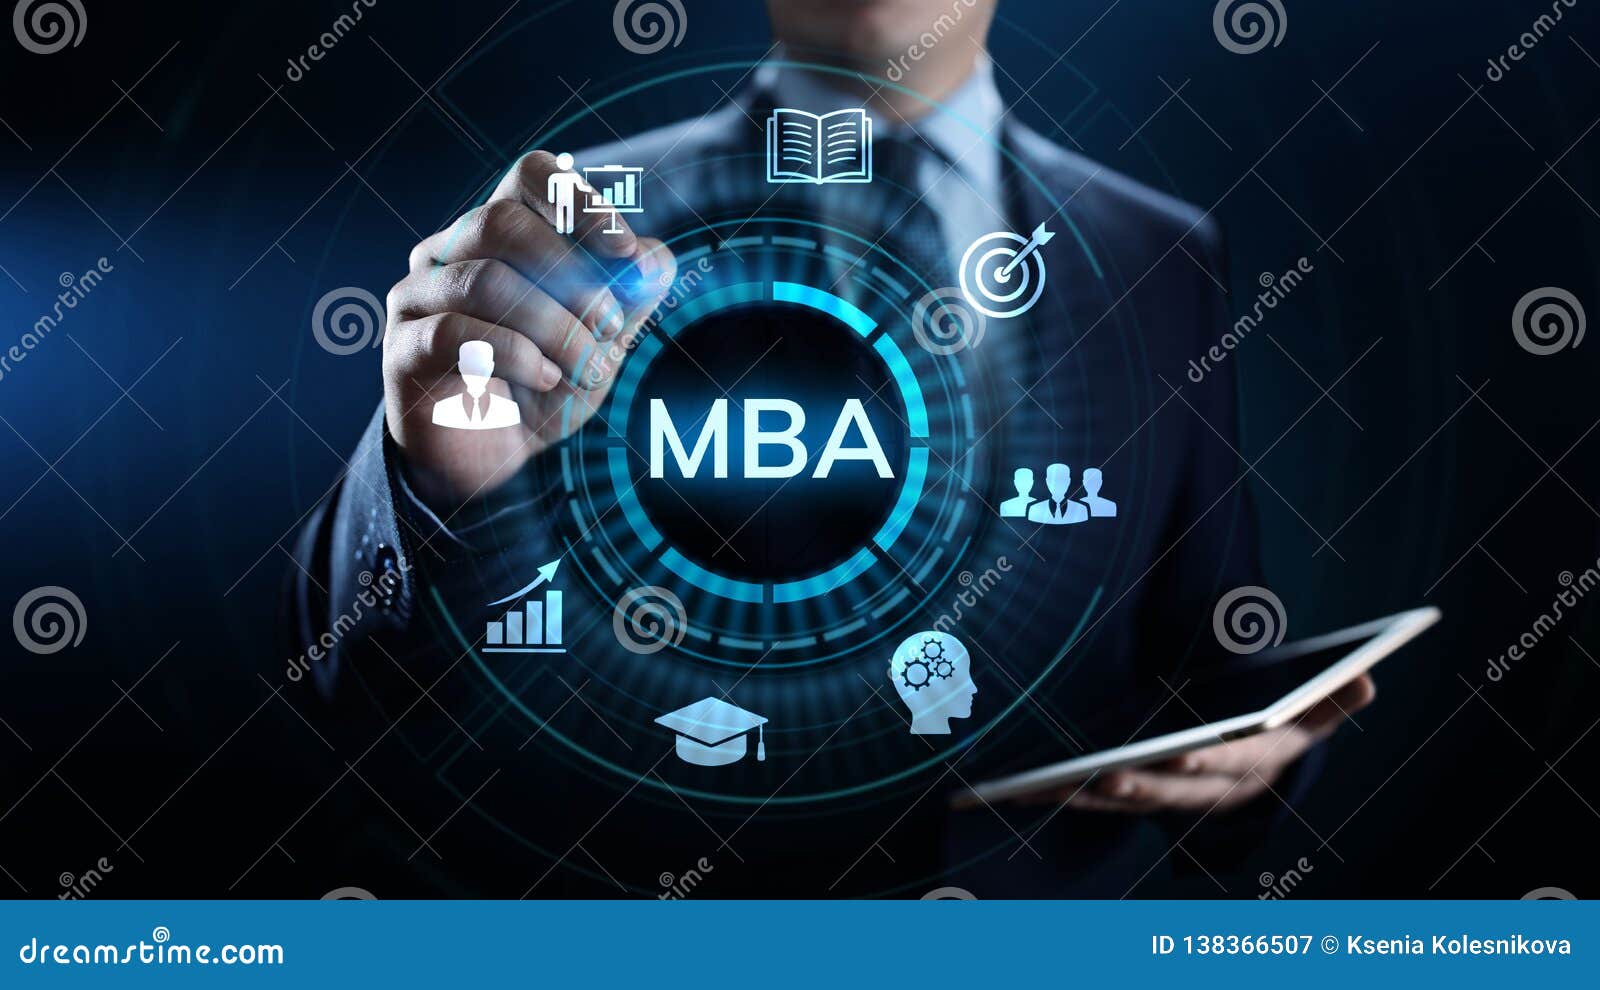 master in business administration mba